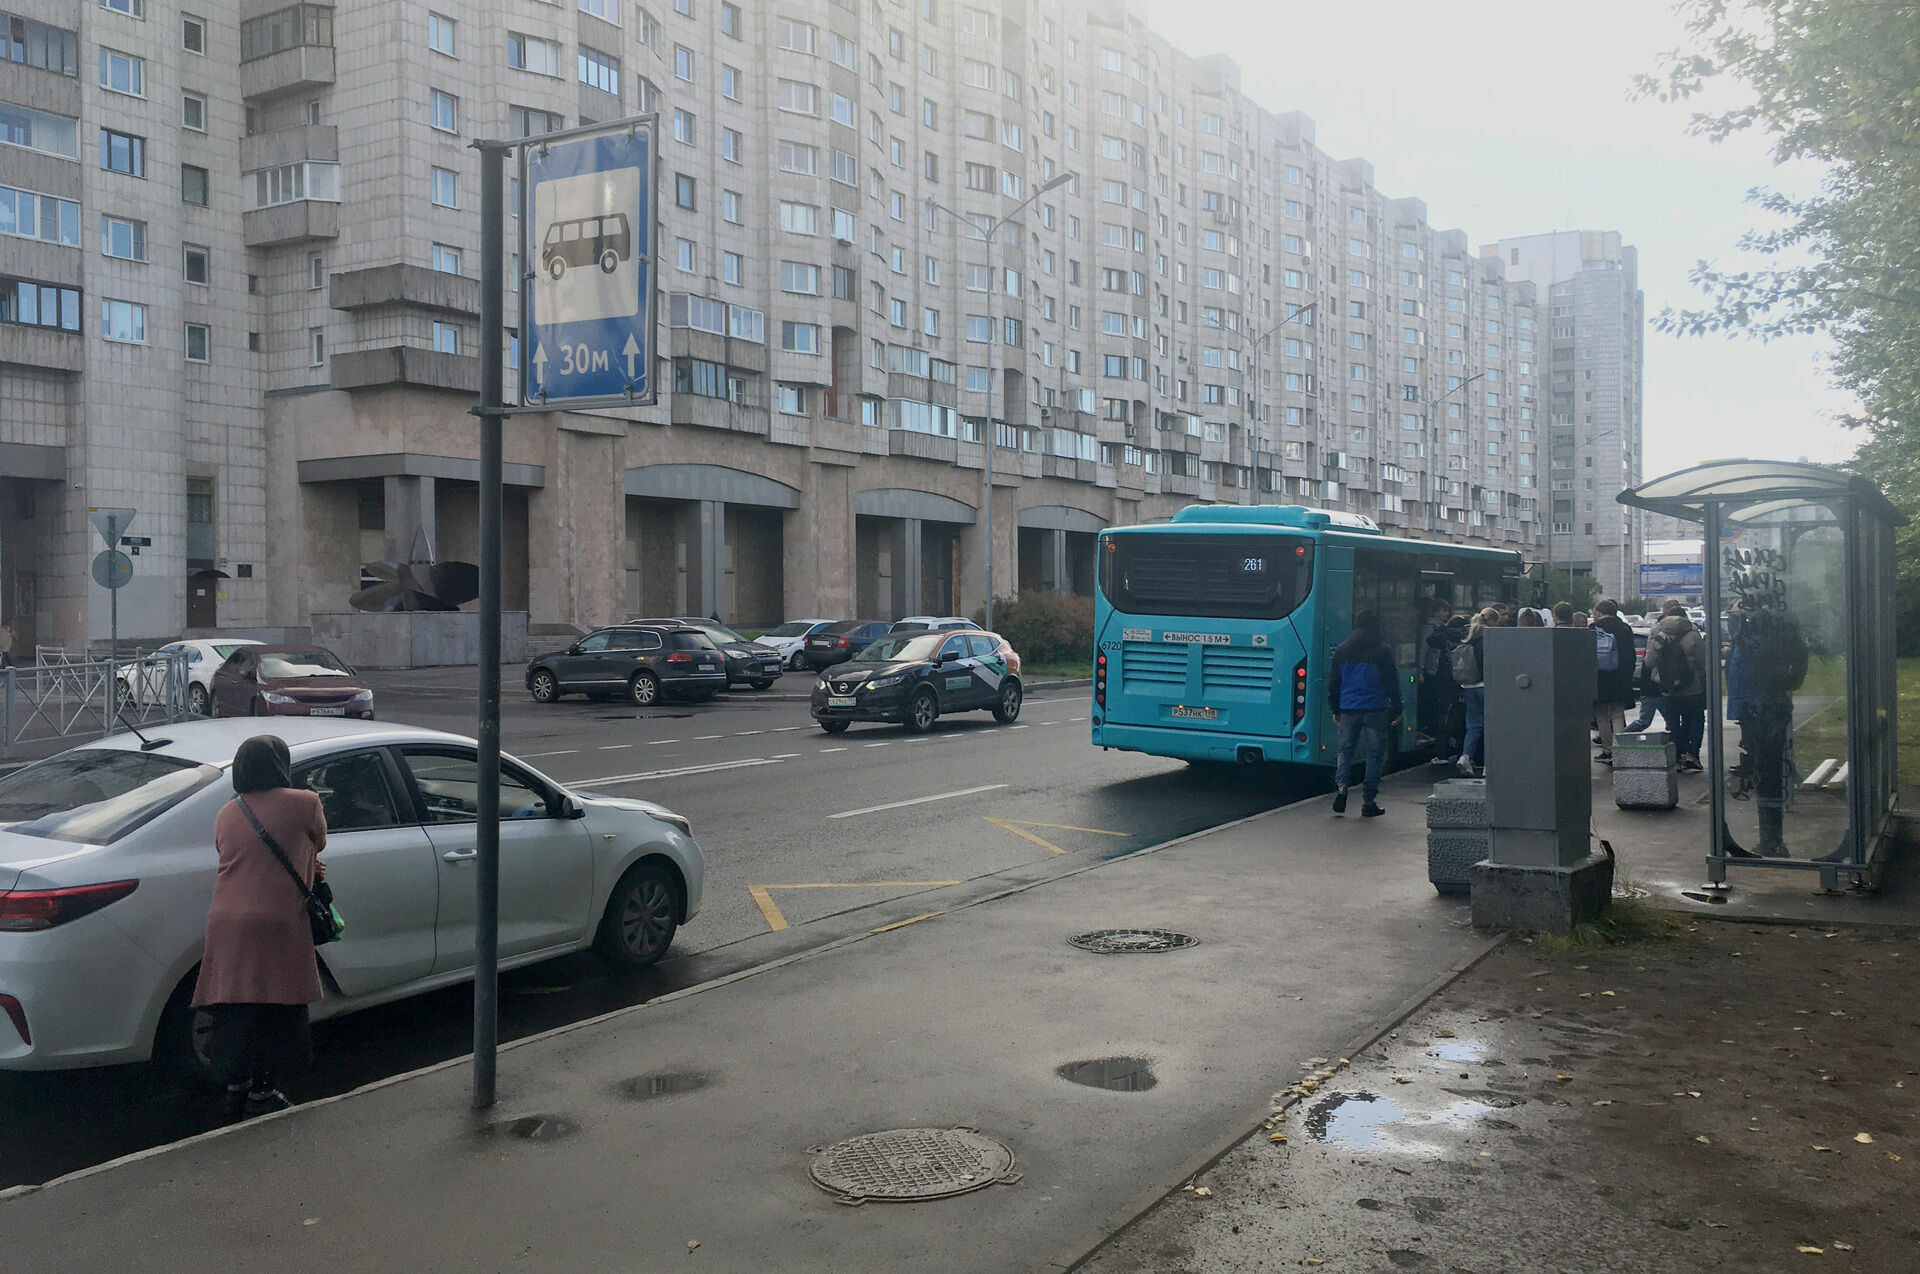 "I'll take you to the subway". In St. Petersburg, taxi drivers compete with buses